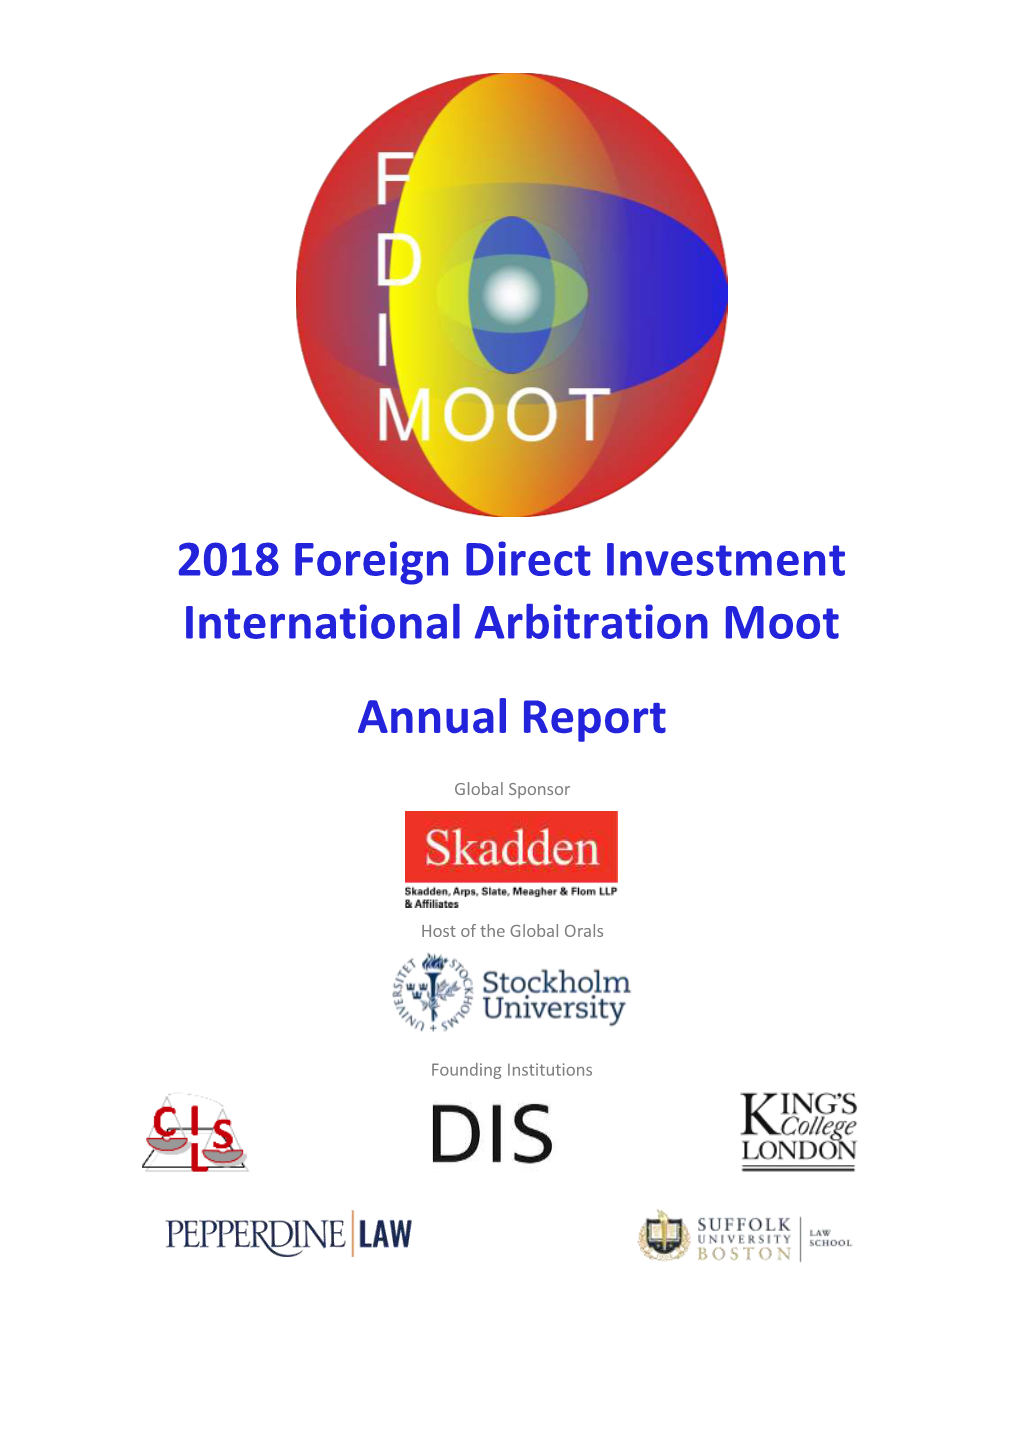 2018 Foreign Direct Investment International Arbitration Moot